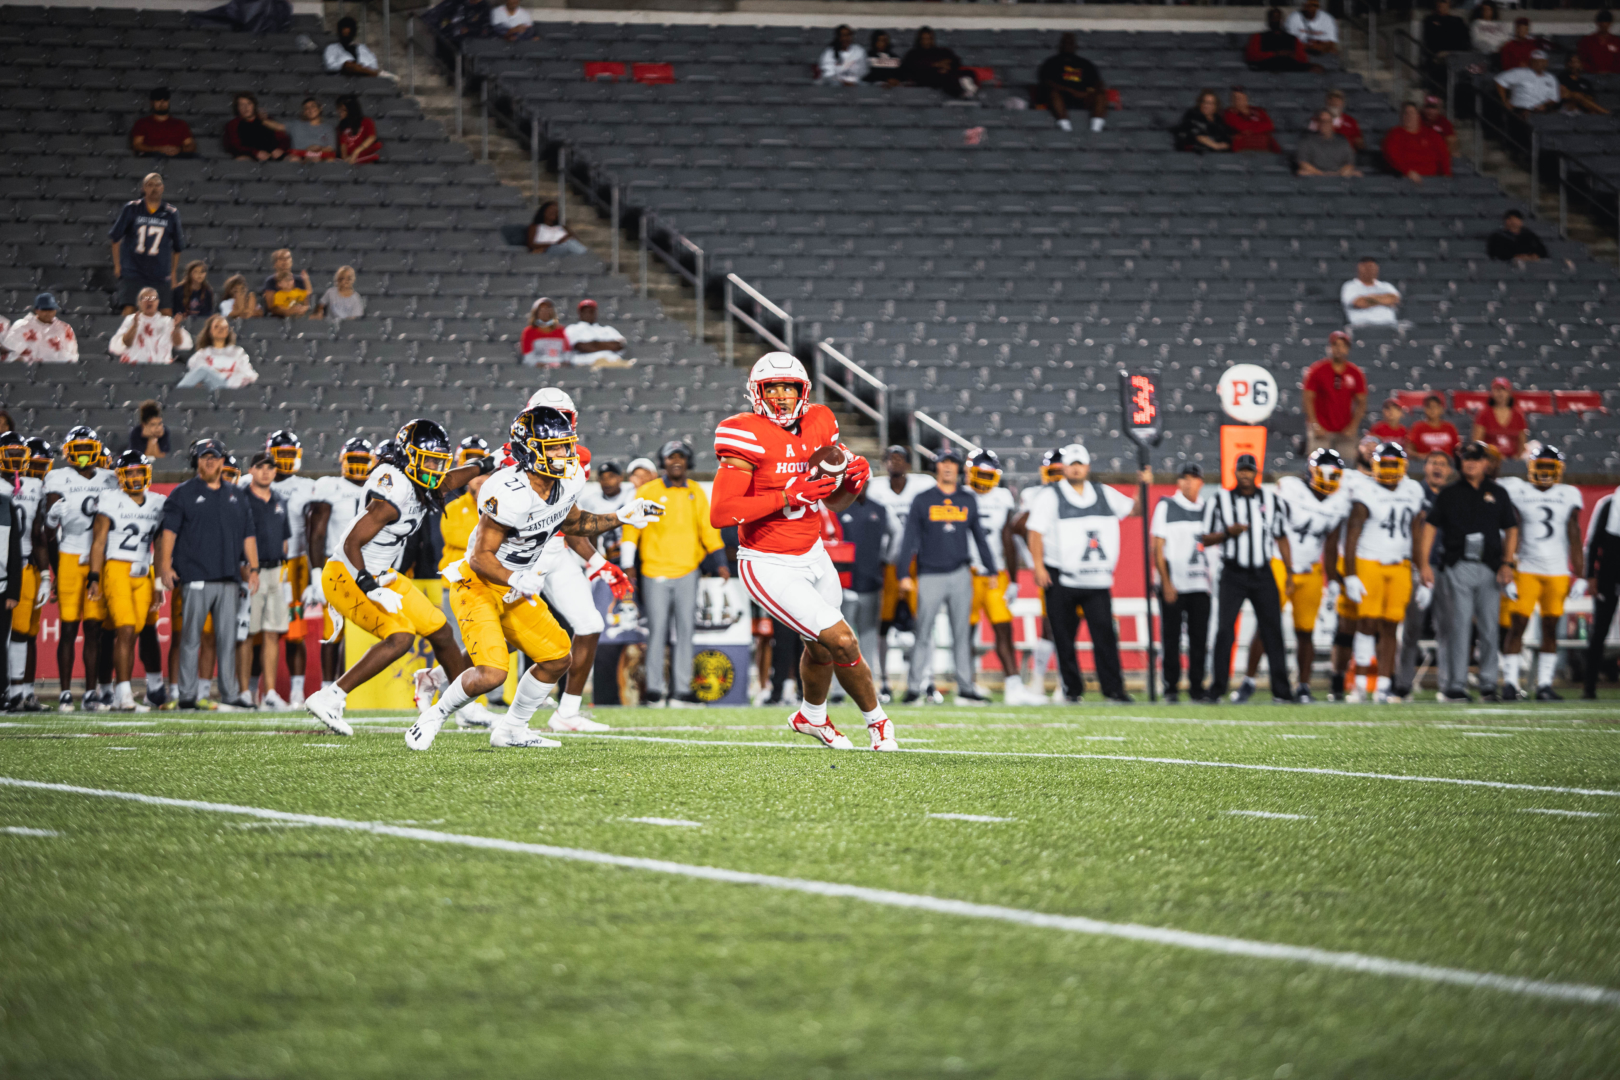 Junior tight end Christian Trahan hauled in a 2-yard touchdown pass during the first quarter of UH's victory over ECU. | James Schillinger/The Cougar